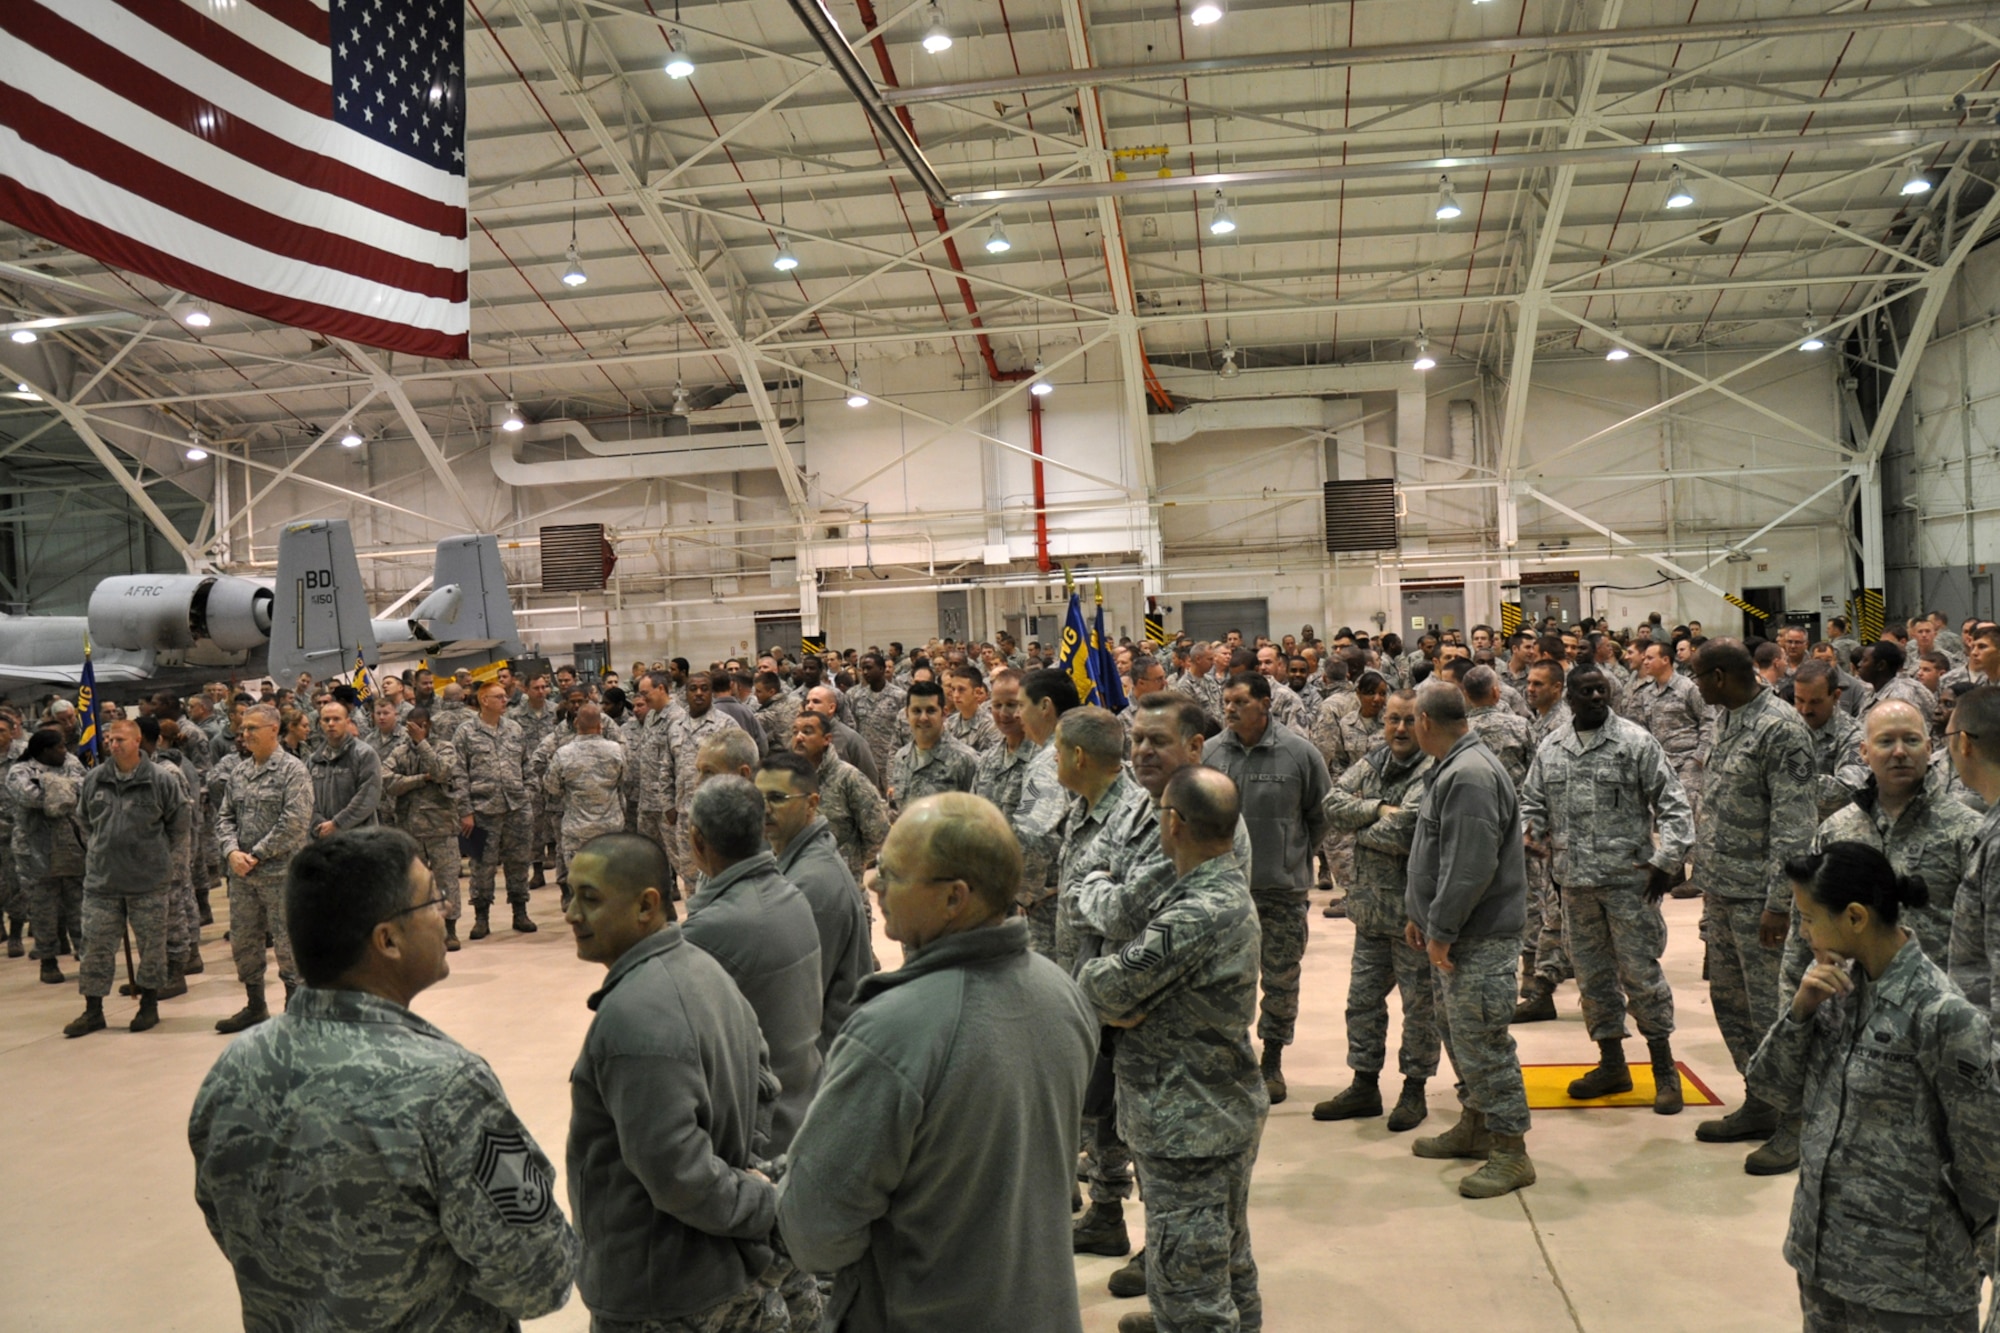 Hundreds from the 917th Maintenance Group gather for the maintenance group commander’s call in the A-10 Hangar at Barksdale Air Force Base, La., Dec. 5, 2010. A mass reenlistment and awards ceremony was conducted during the event.  (U.S. Air Force photo /Tech. Sgt. Jeff Walston)
 
